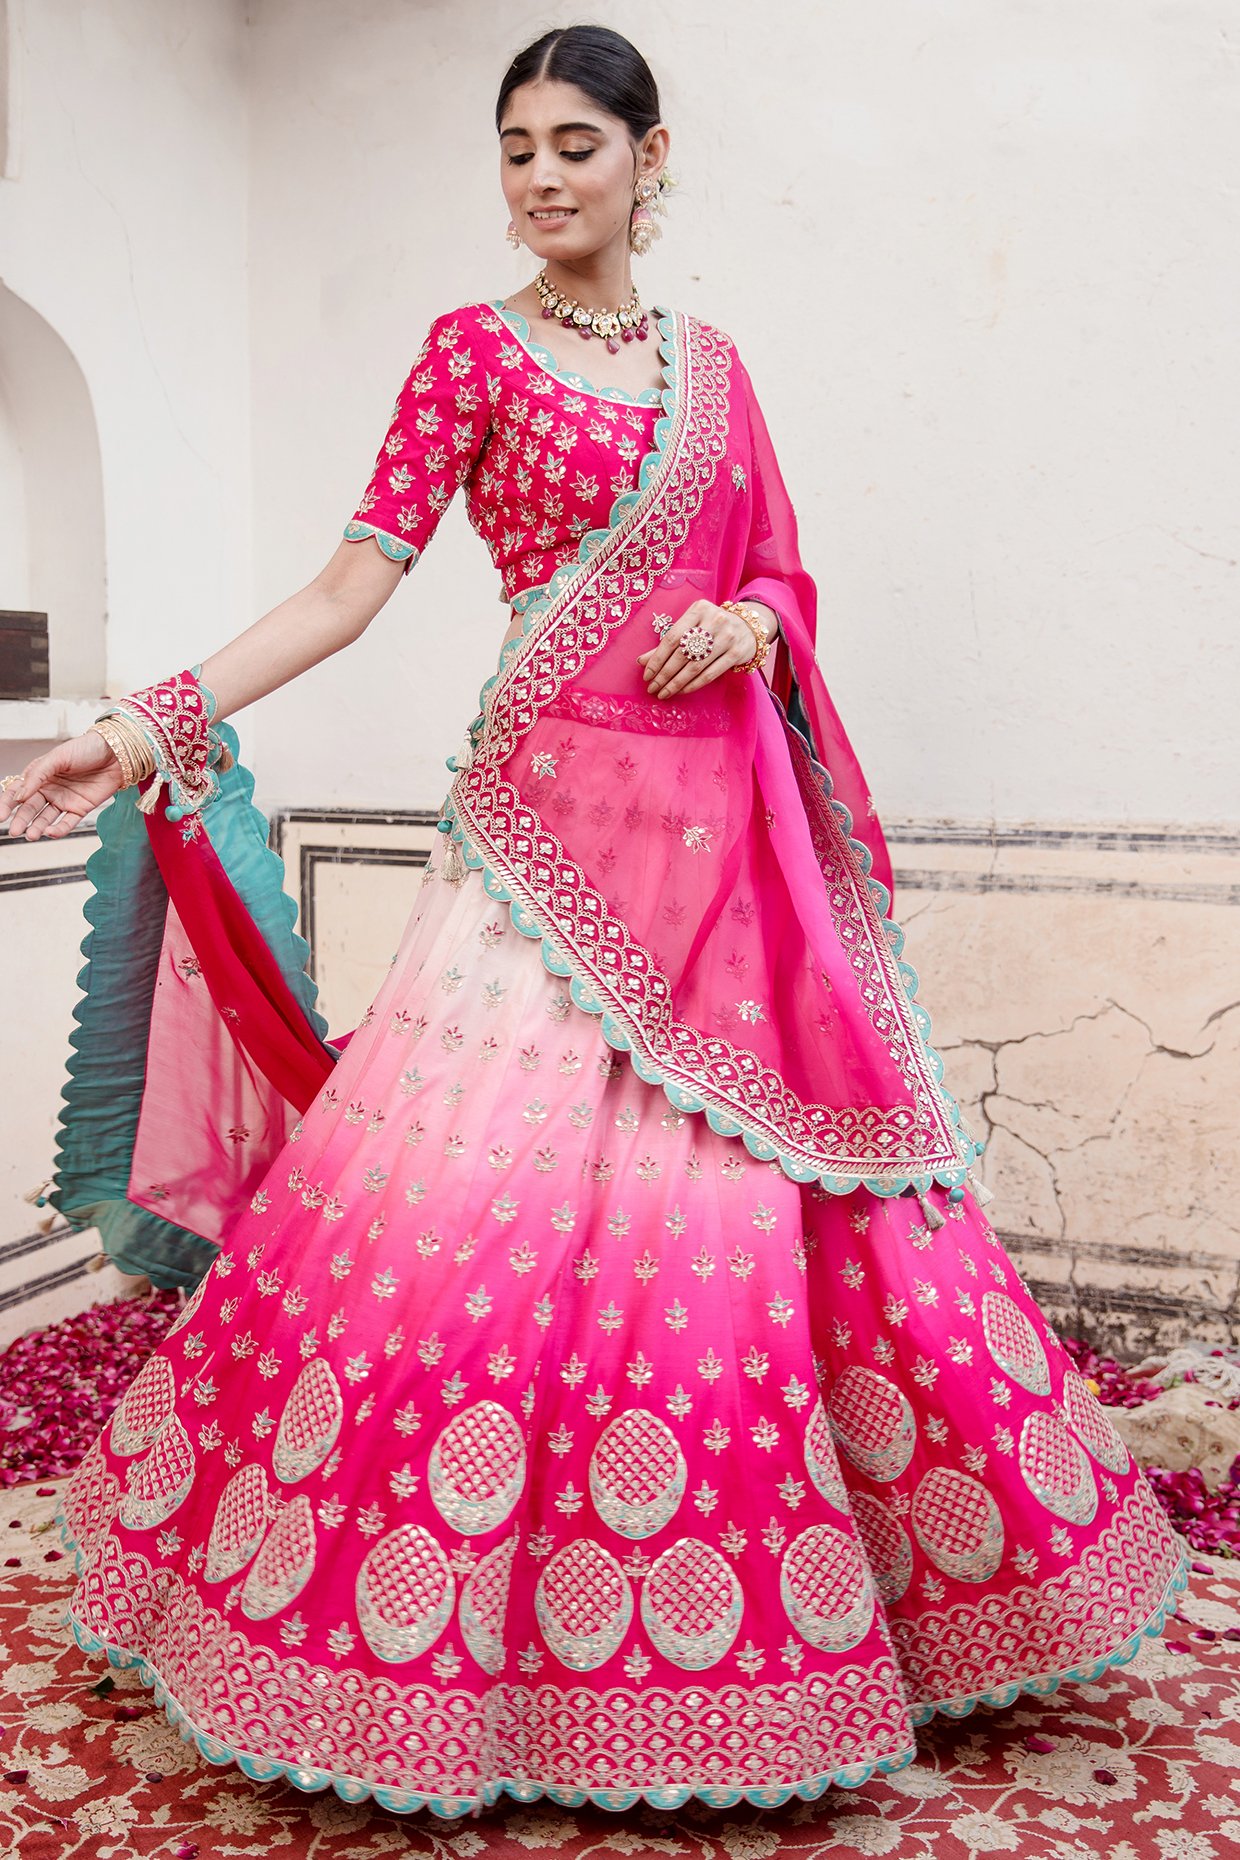 Buy Rani Pink Heavy Lehenga Paired With Blouse and Dupatta by Designer  PUNIT BALANA Online at Ogaan.com